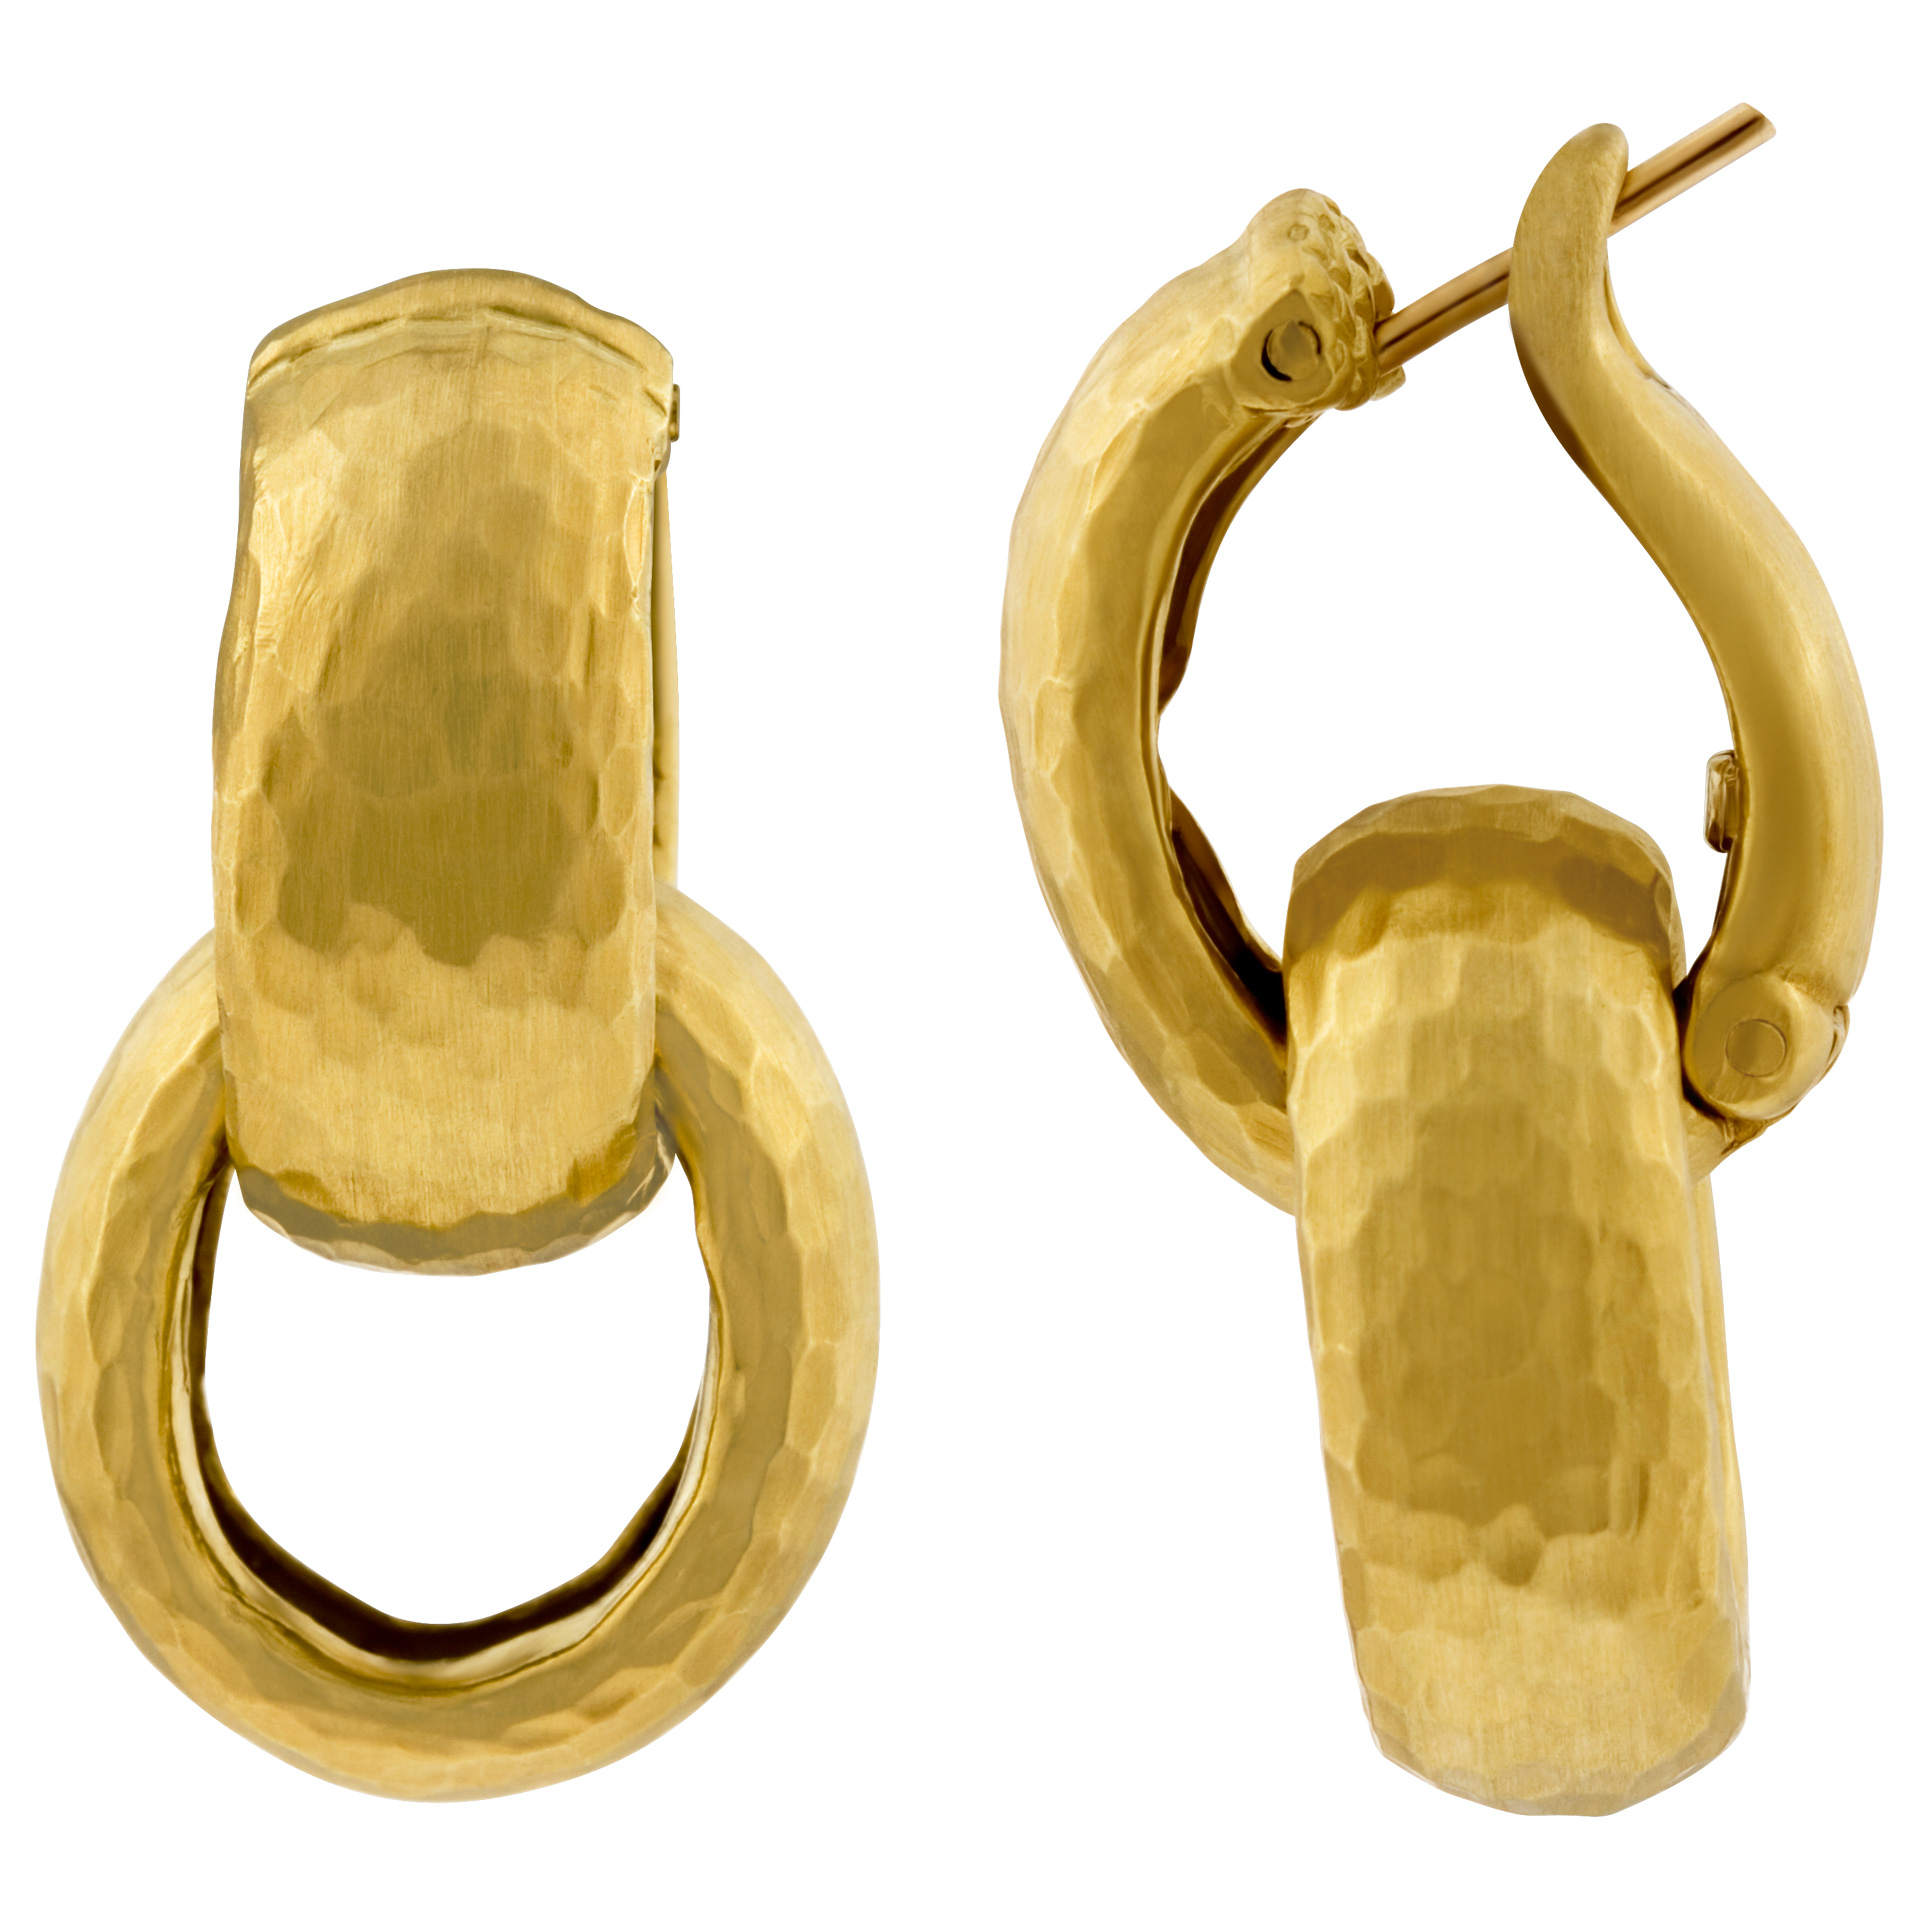 Hoop earrings with removable circles in 18k